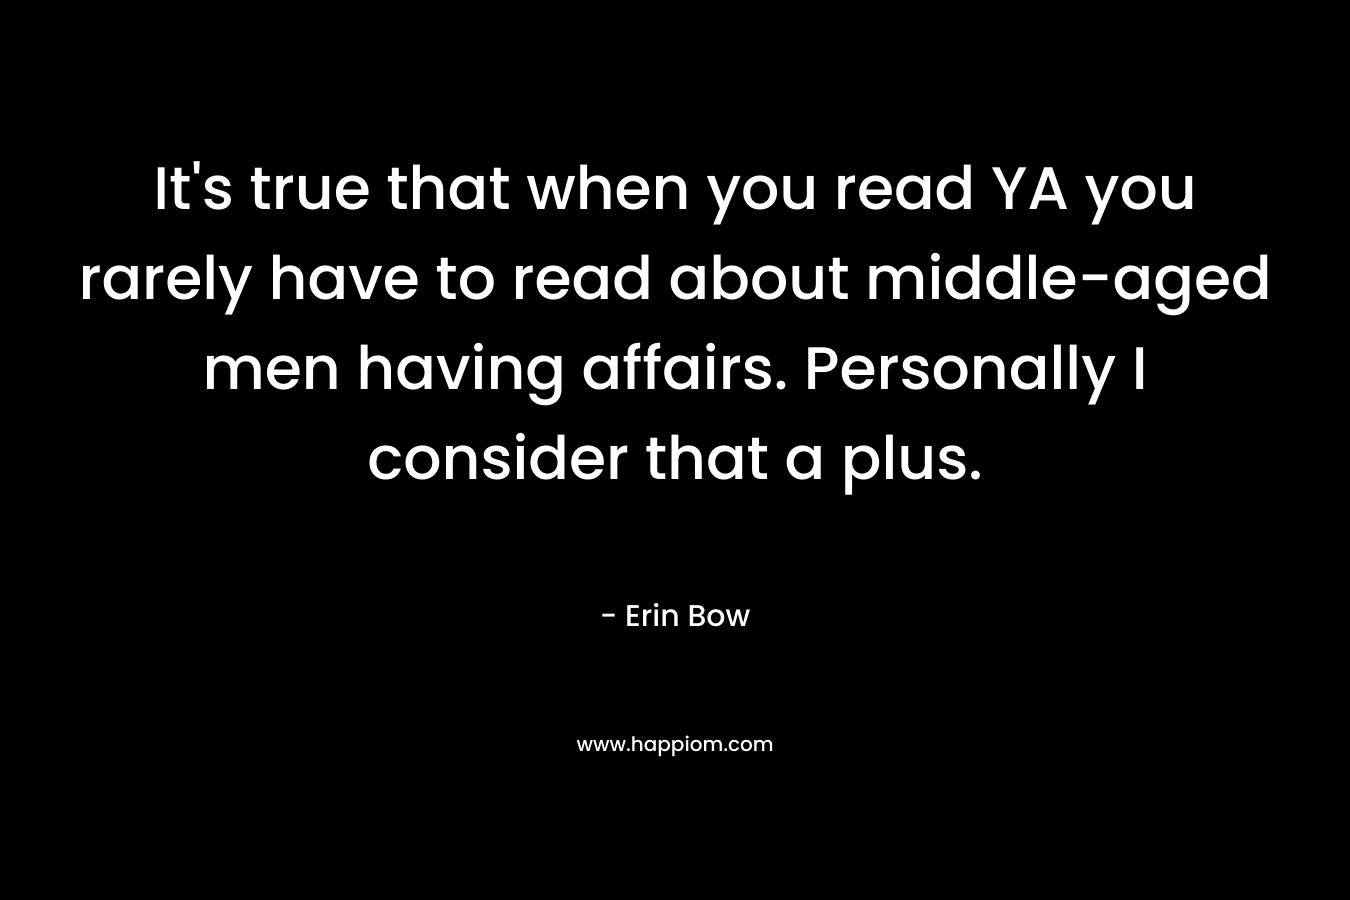 It’s true that when you read YA you rarely have to read about middle-aged men having affairs. Personally I consider that a plus. – Erin Bow